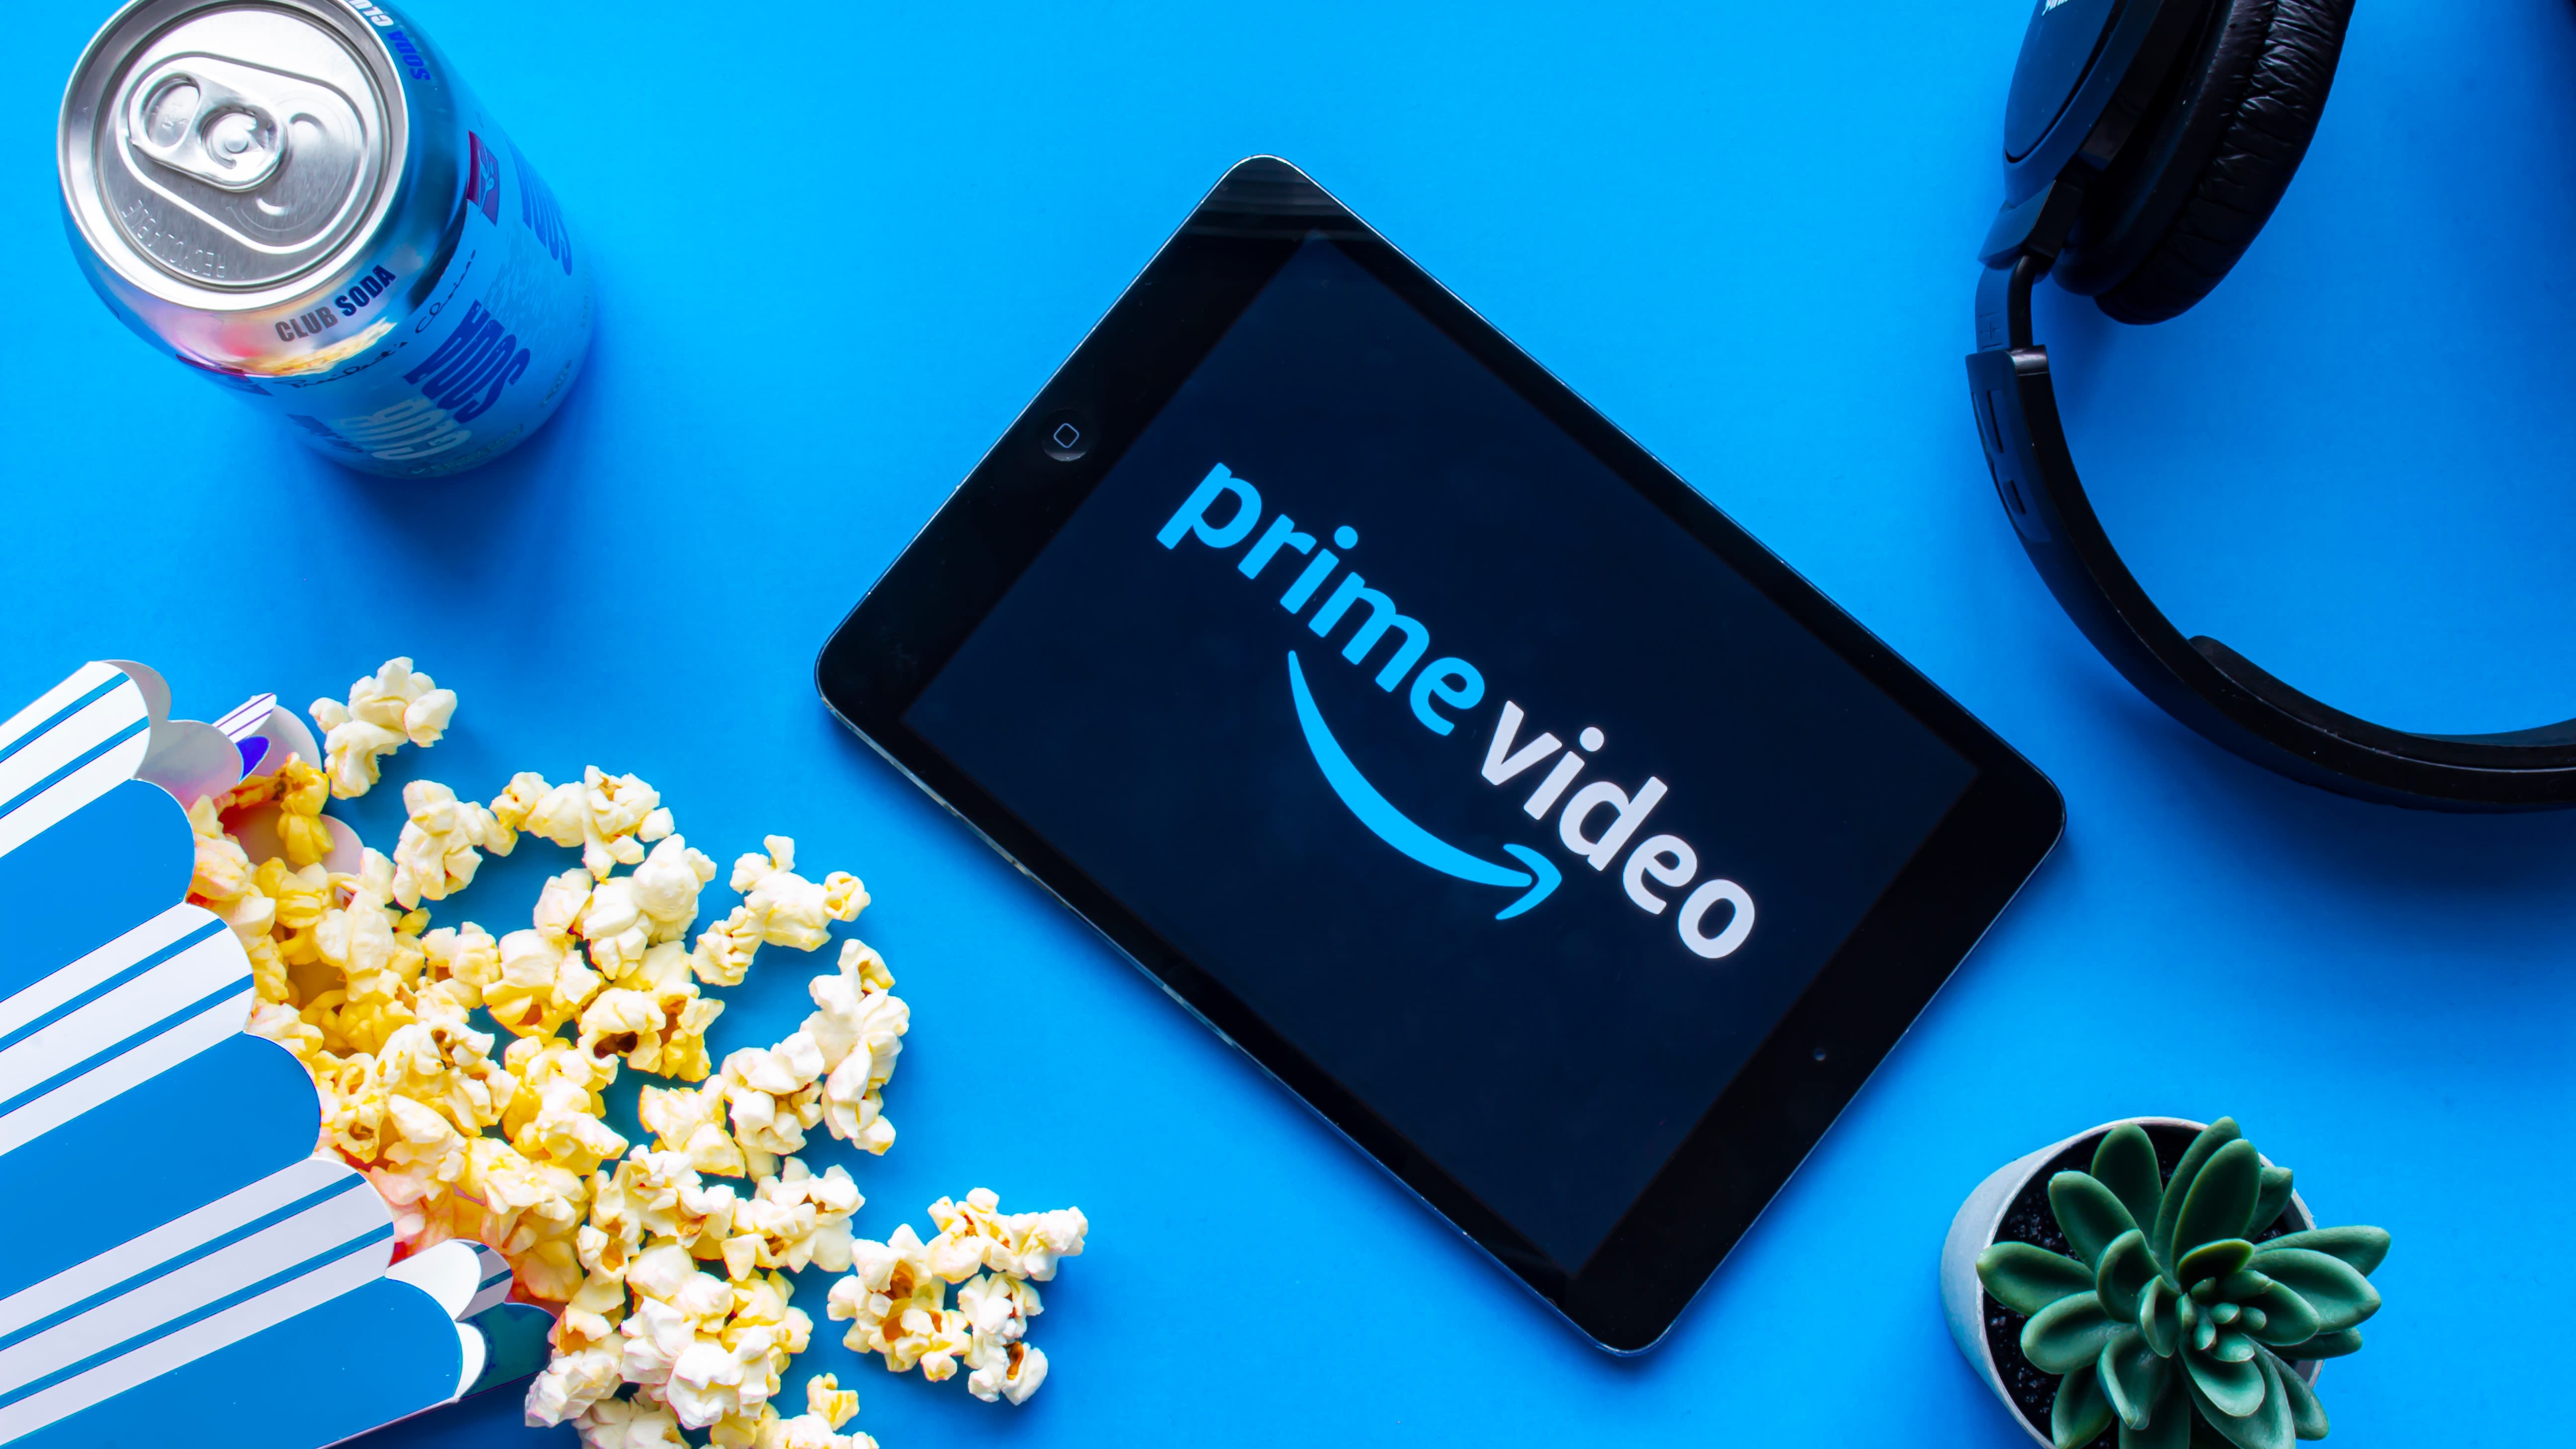 9 new to Prime Video movies with 90% or higher on Rotten Tomatoes